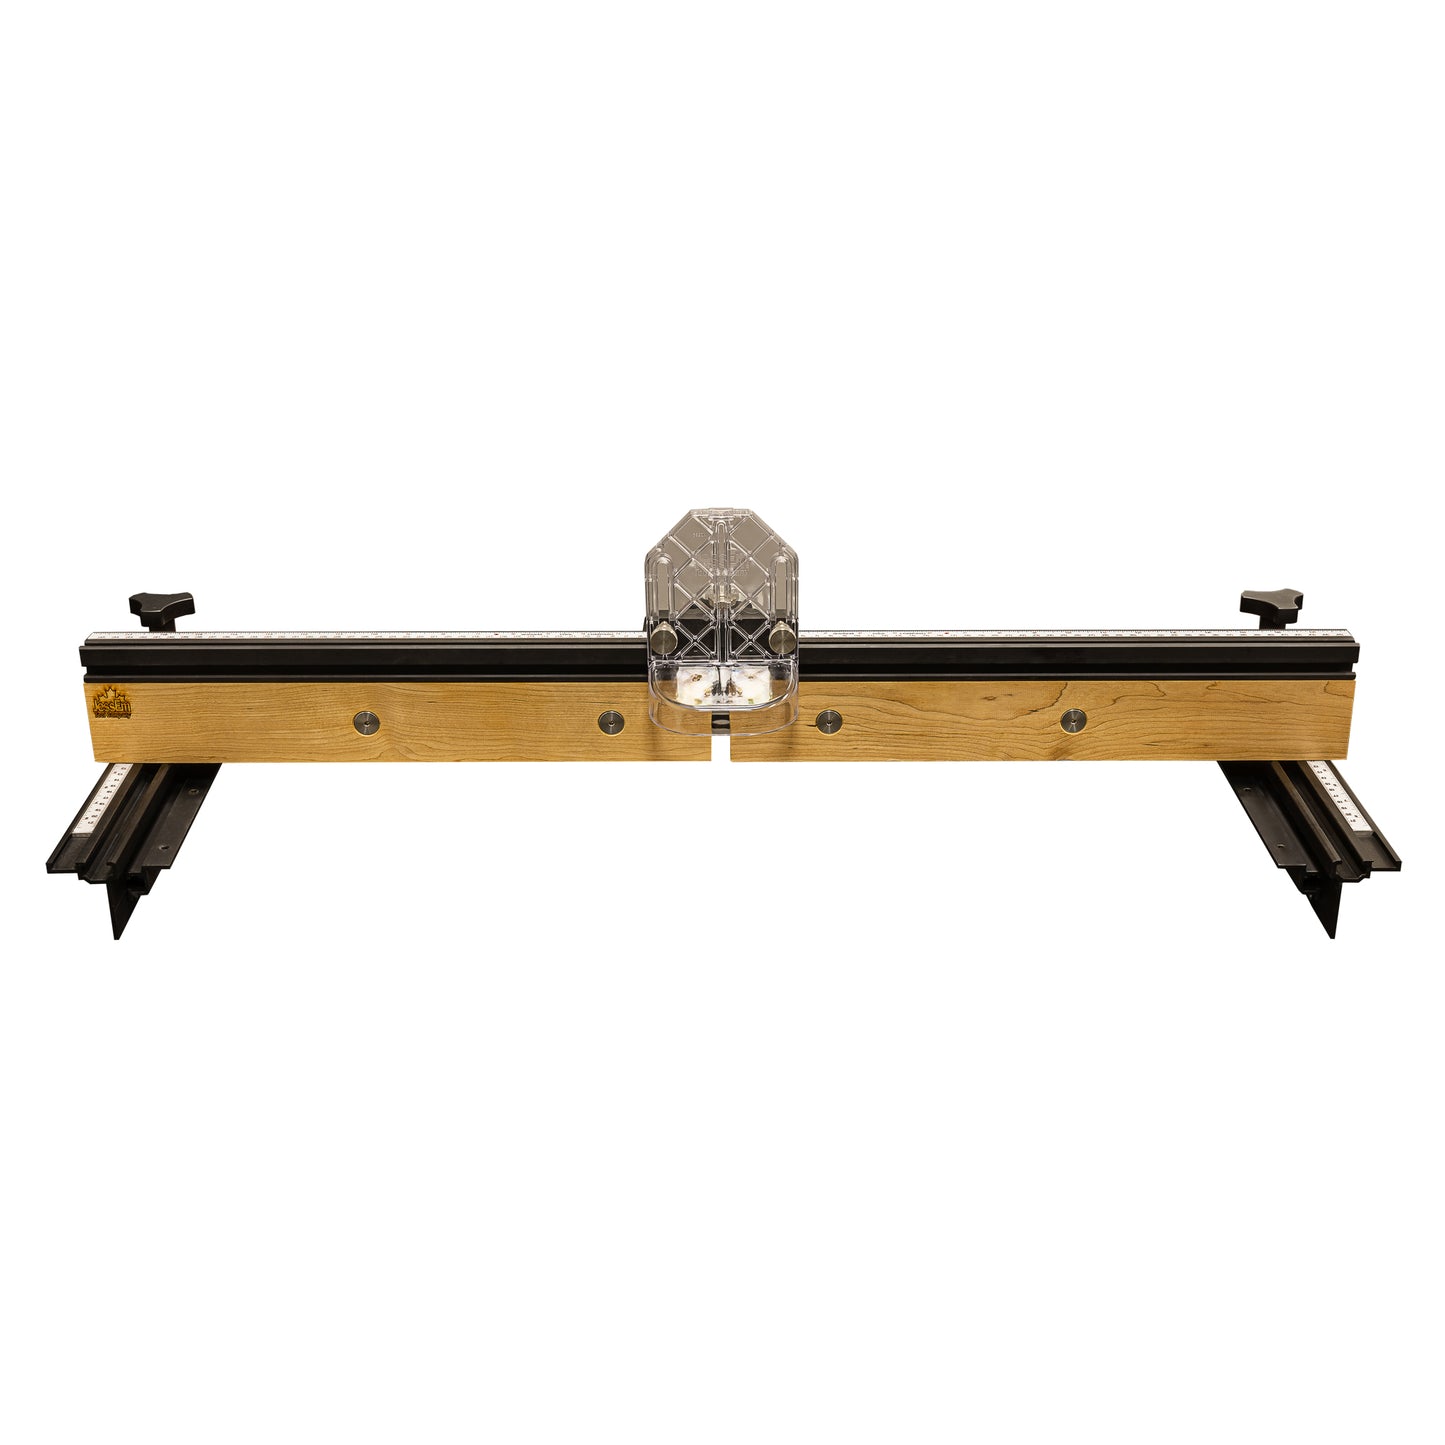 Mast-R-Lift II Router Table Package - THIS ITEM IS ESTIMATED TO SHIP WITHIN 4 - 6 WEEKS